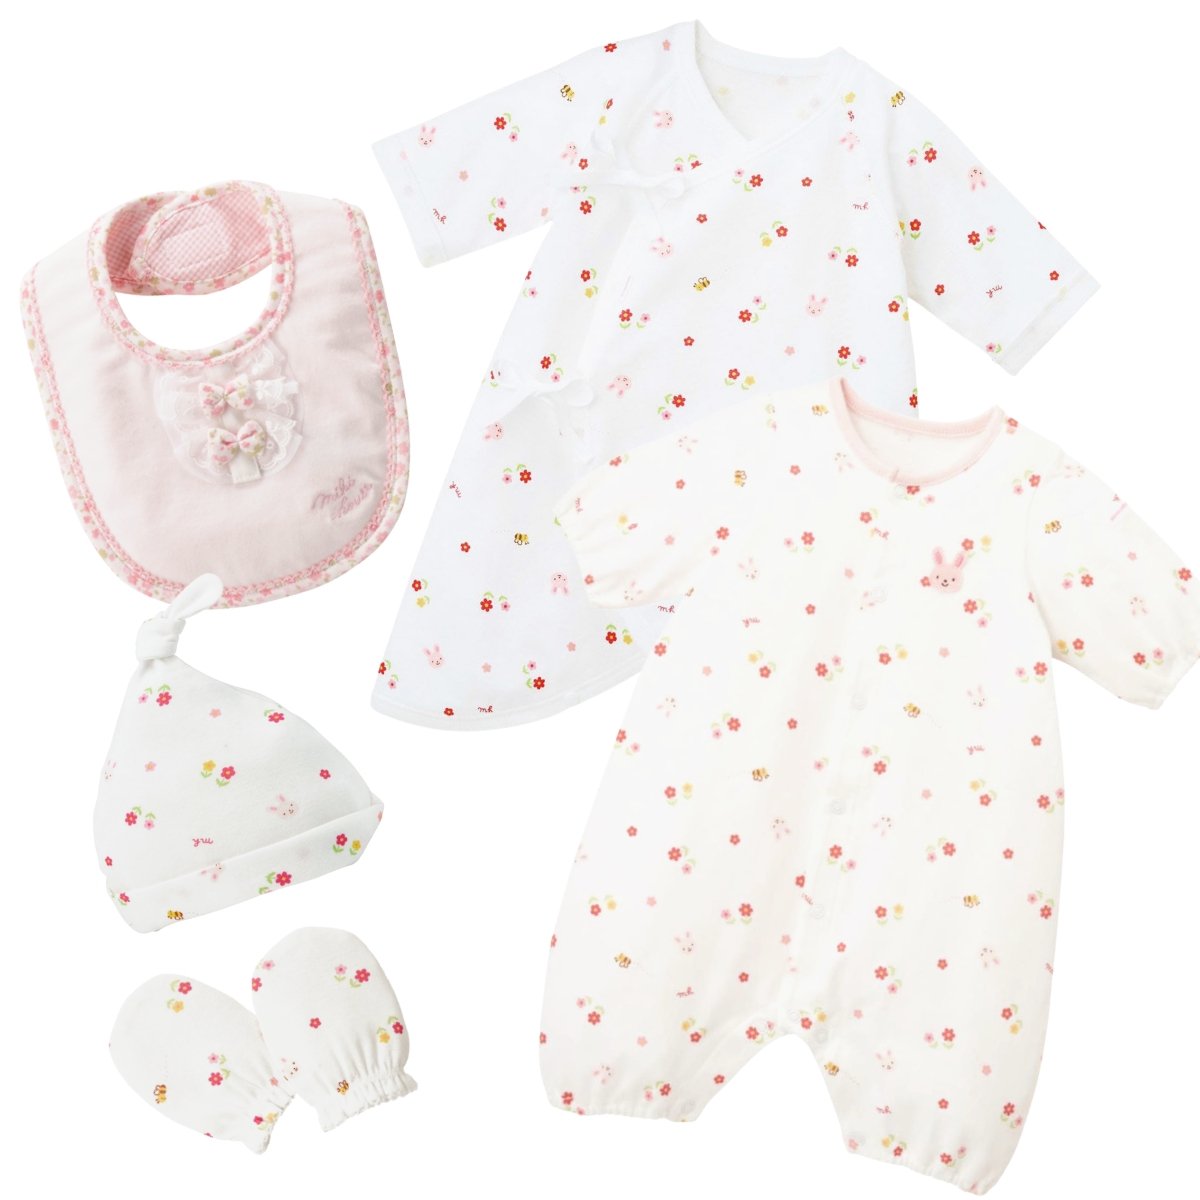 Floral Delight Baby Gift Set - MIKI HOUSE USA